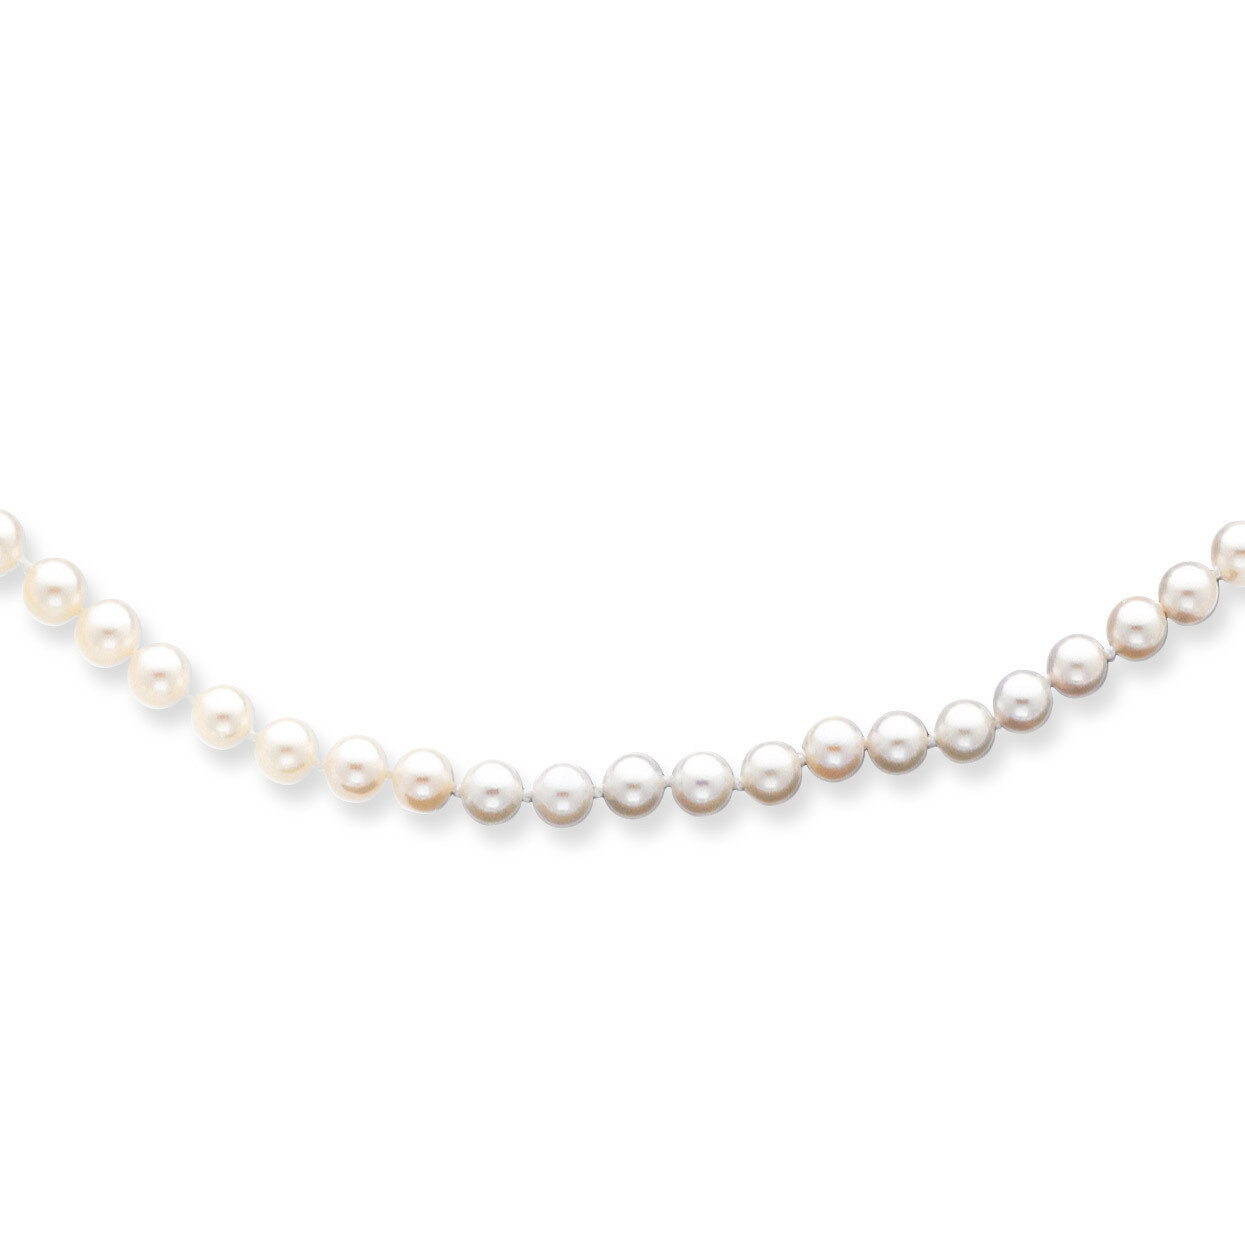 5-6mm Round White Saltwater Akoya Cultured Pearl Necklace 24 Inch 14k Gold PL50AA-24